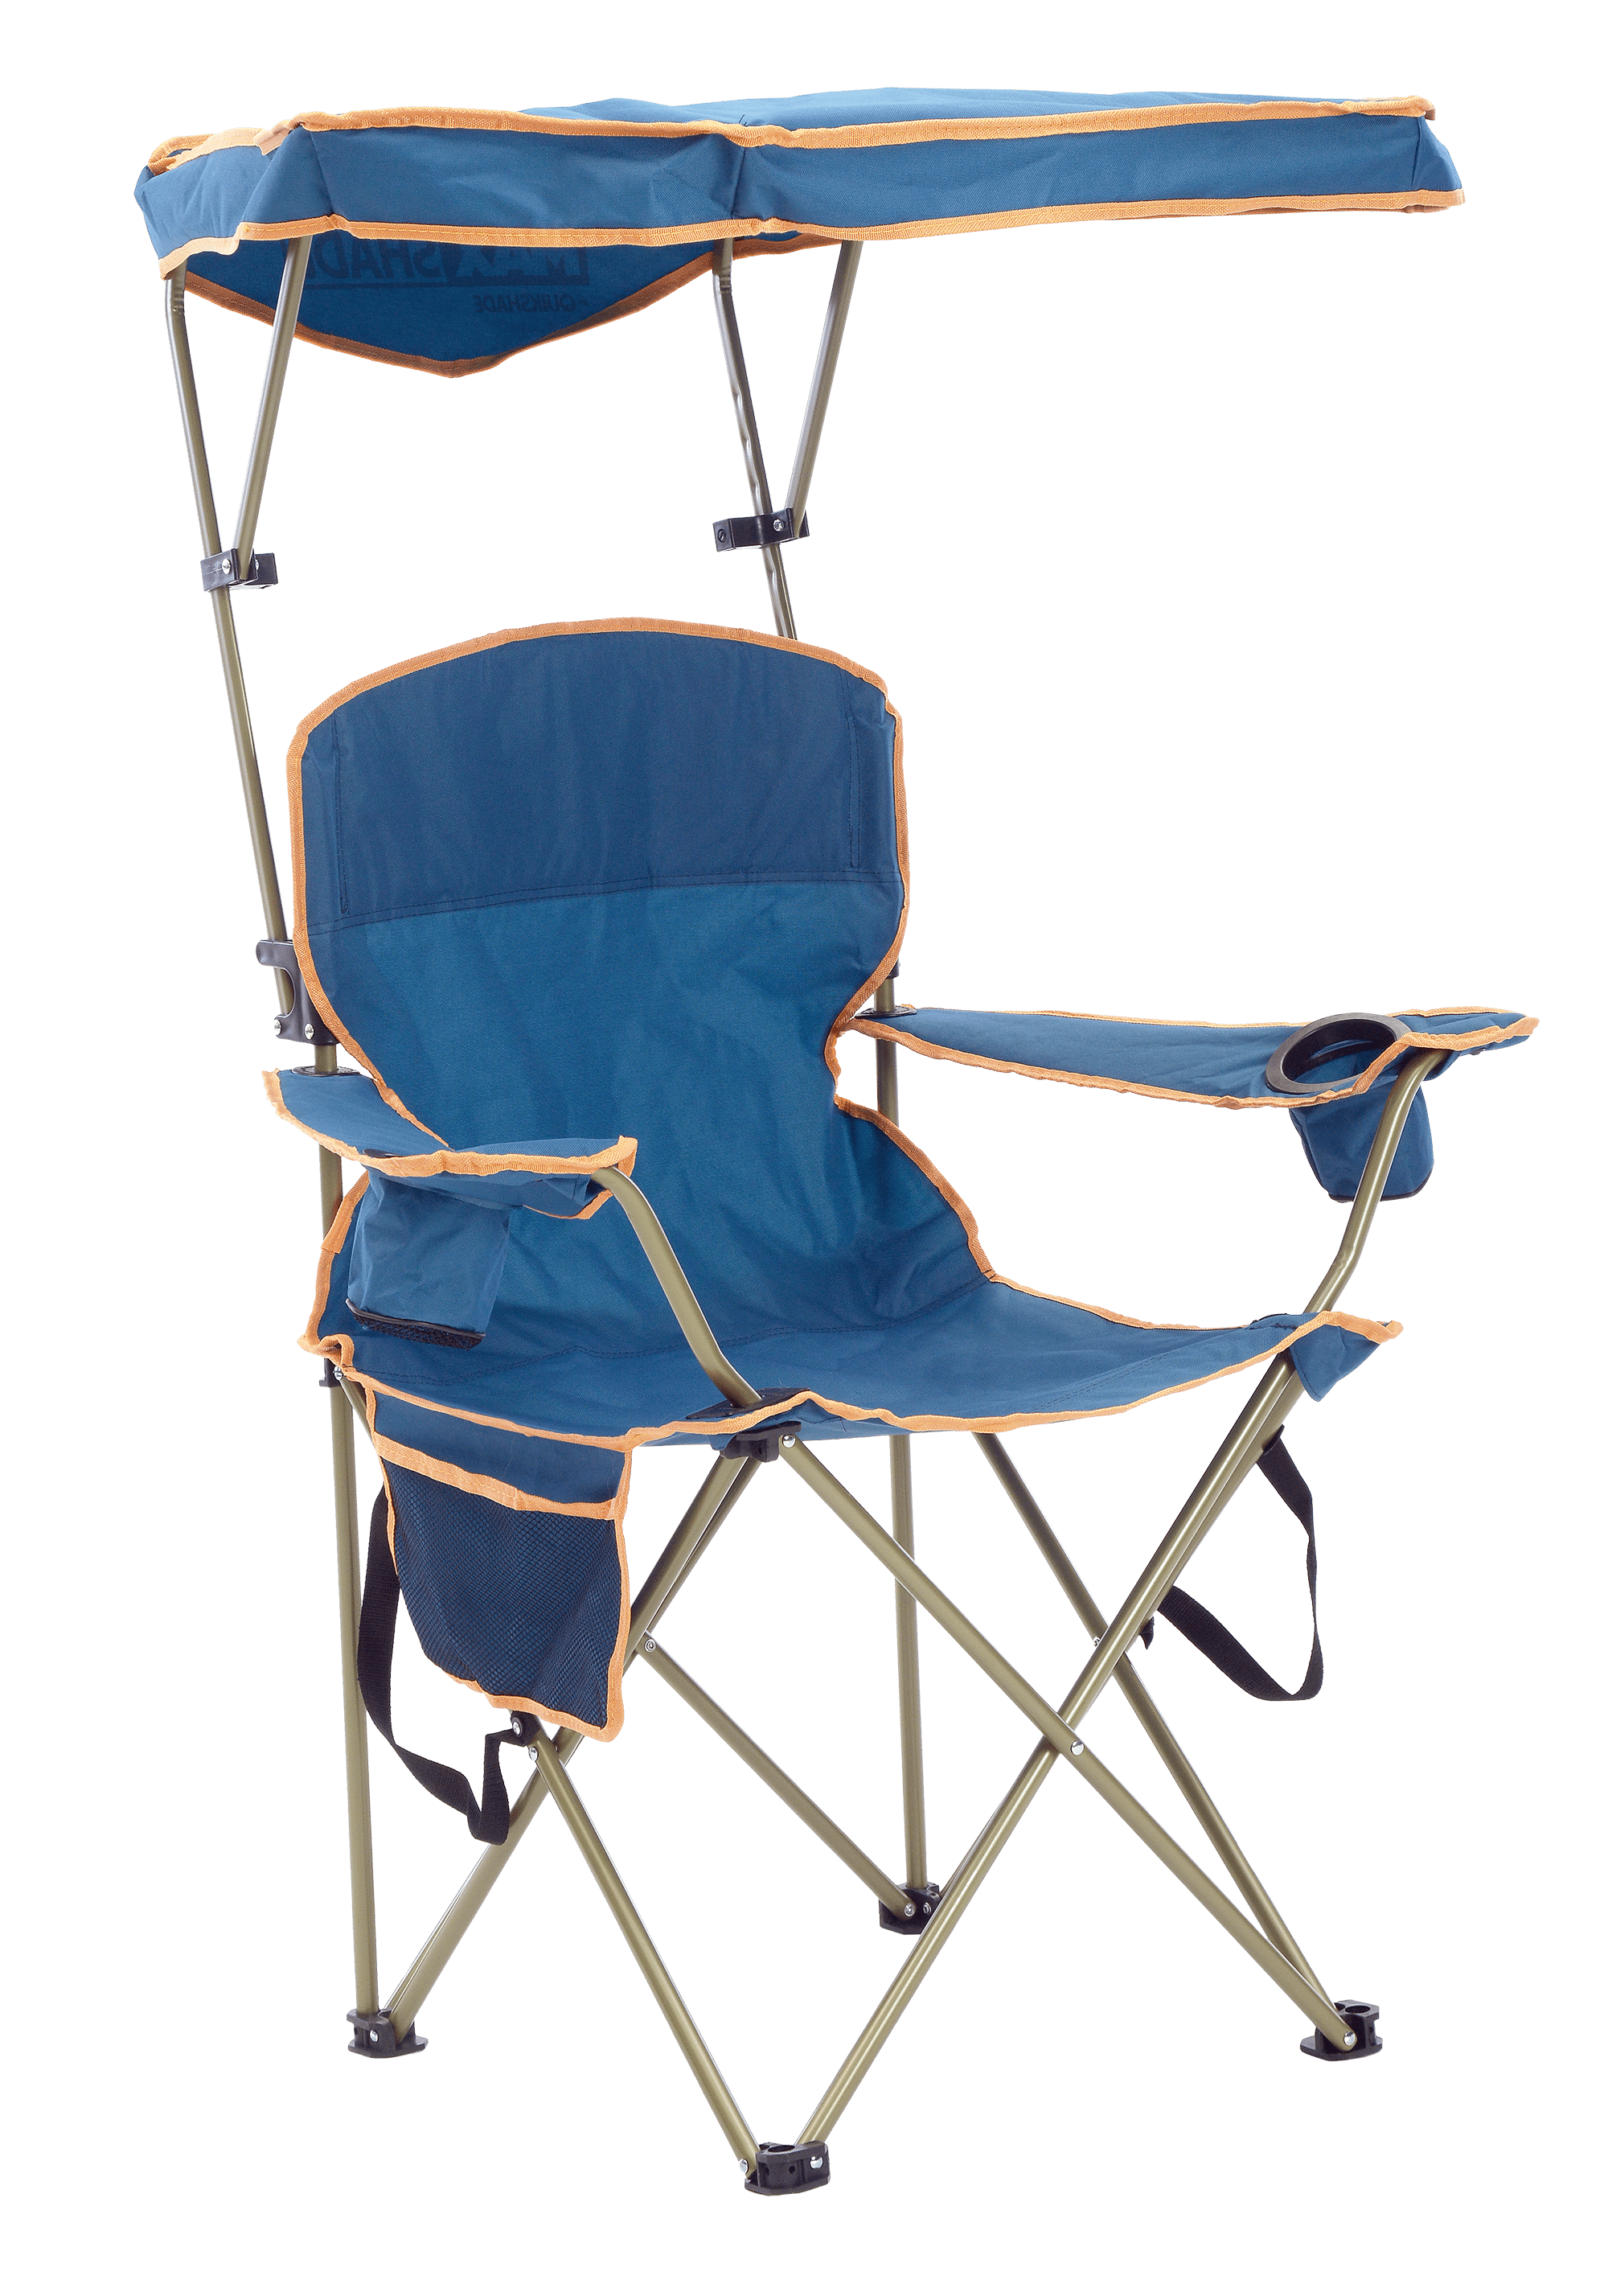 Minimalist Folding Chairs Walmart Camping for Simple Design